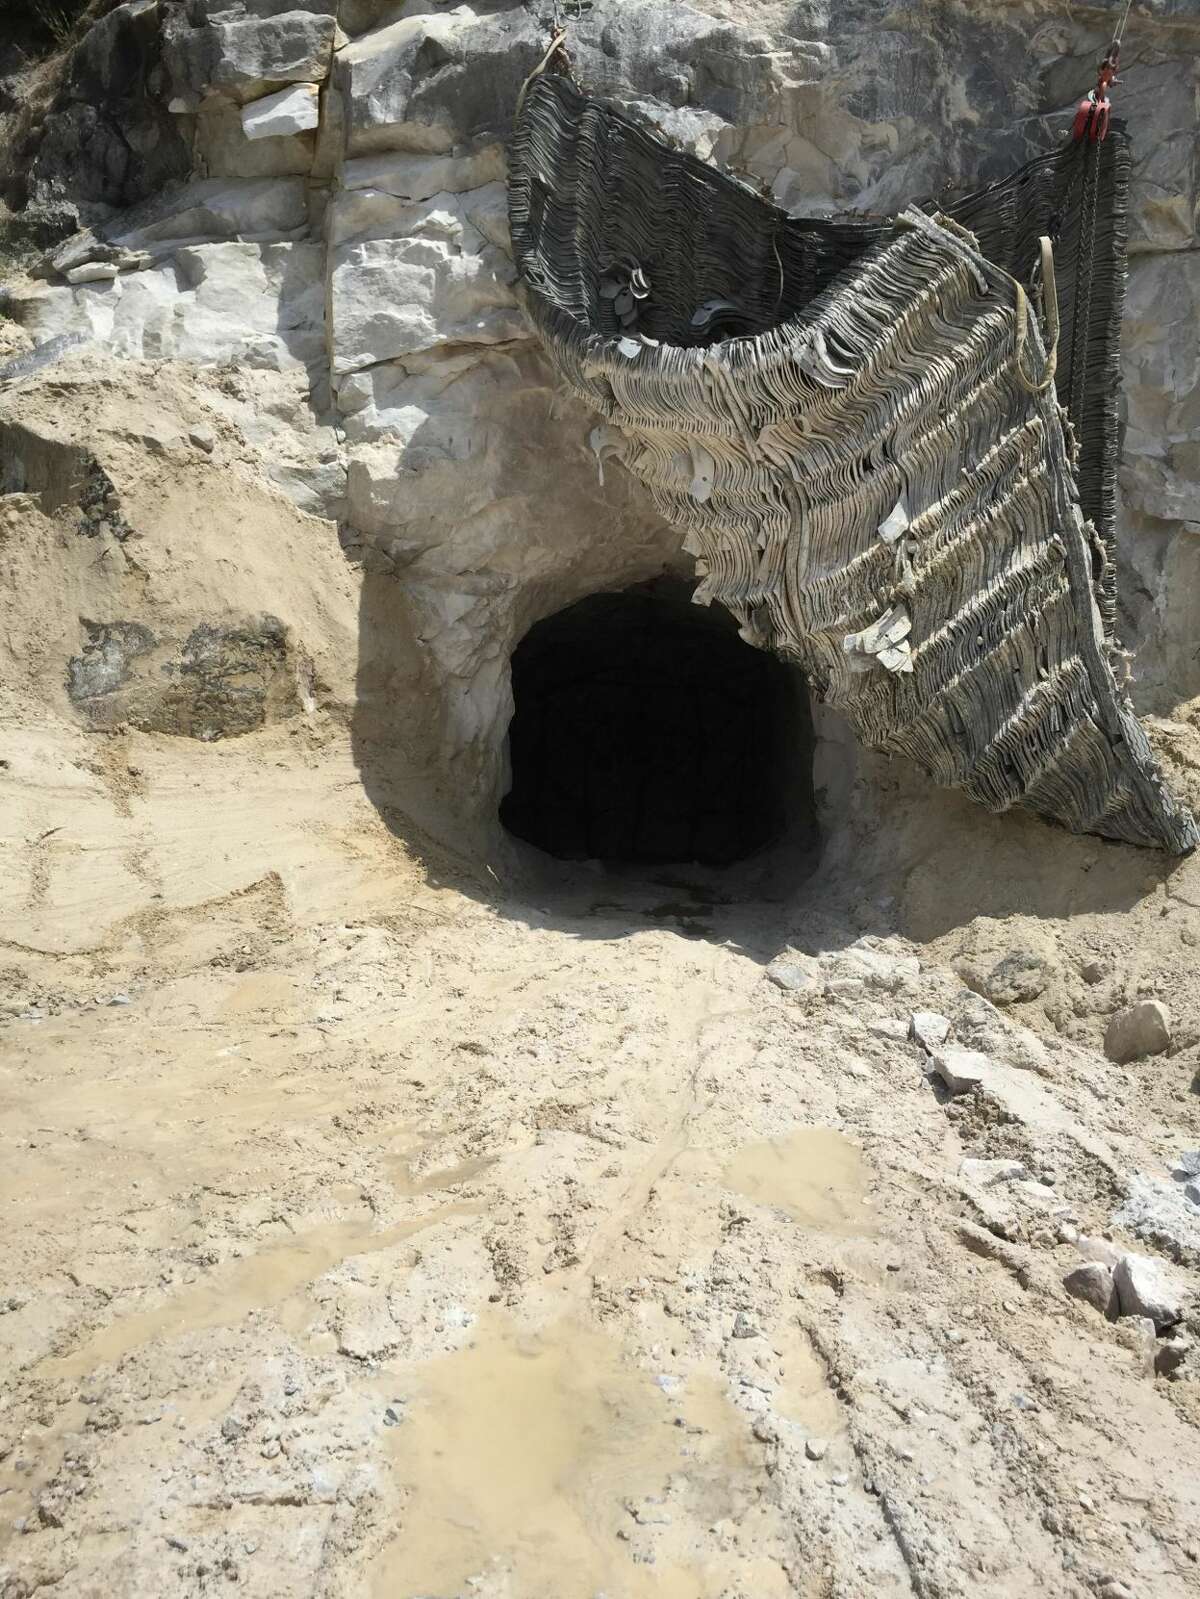 The exterior of the bat hibernaculum at the New Milford quarry during construction.